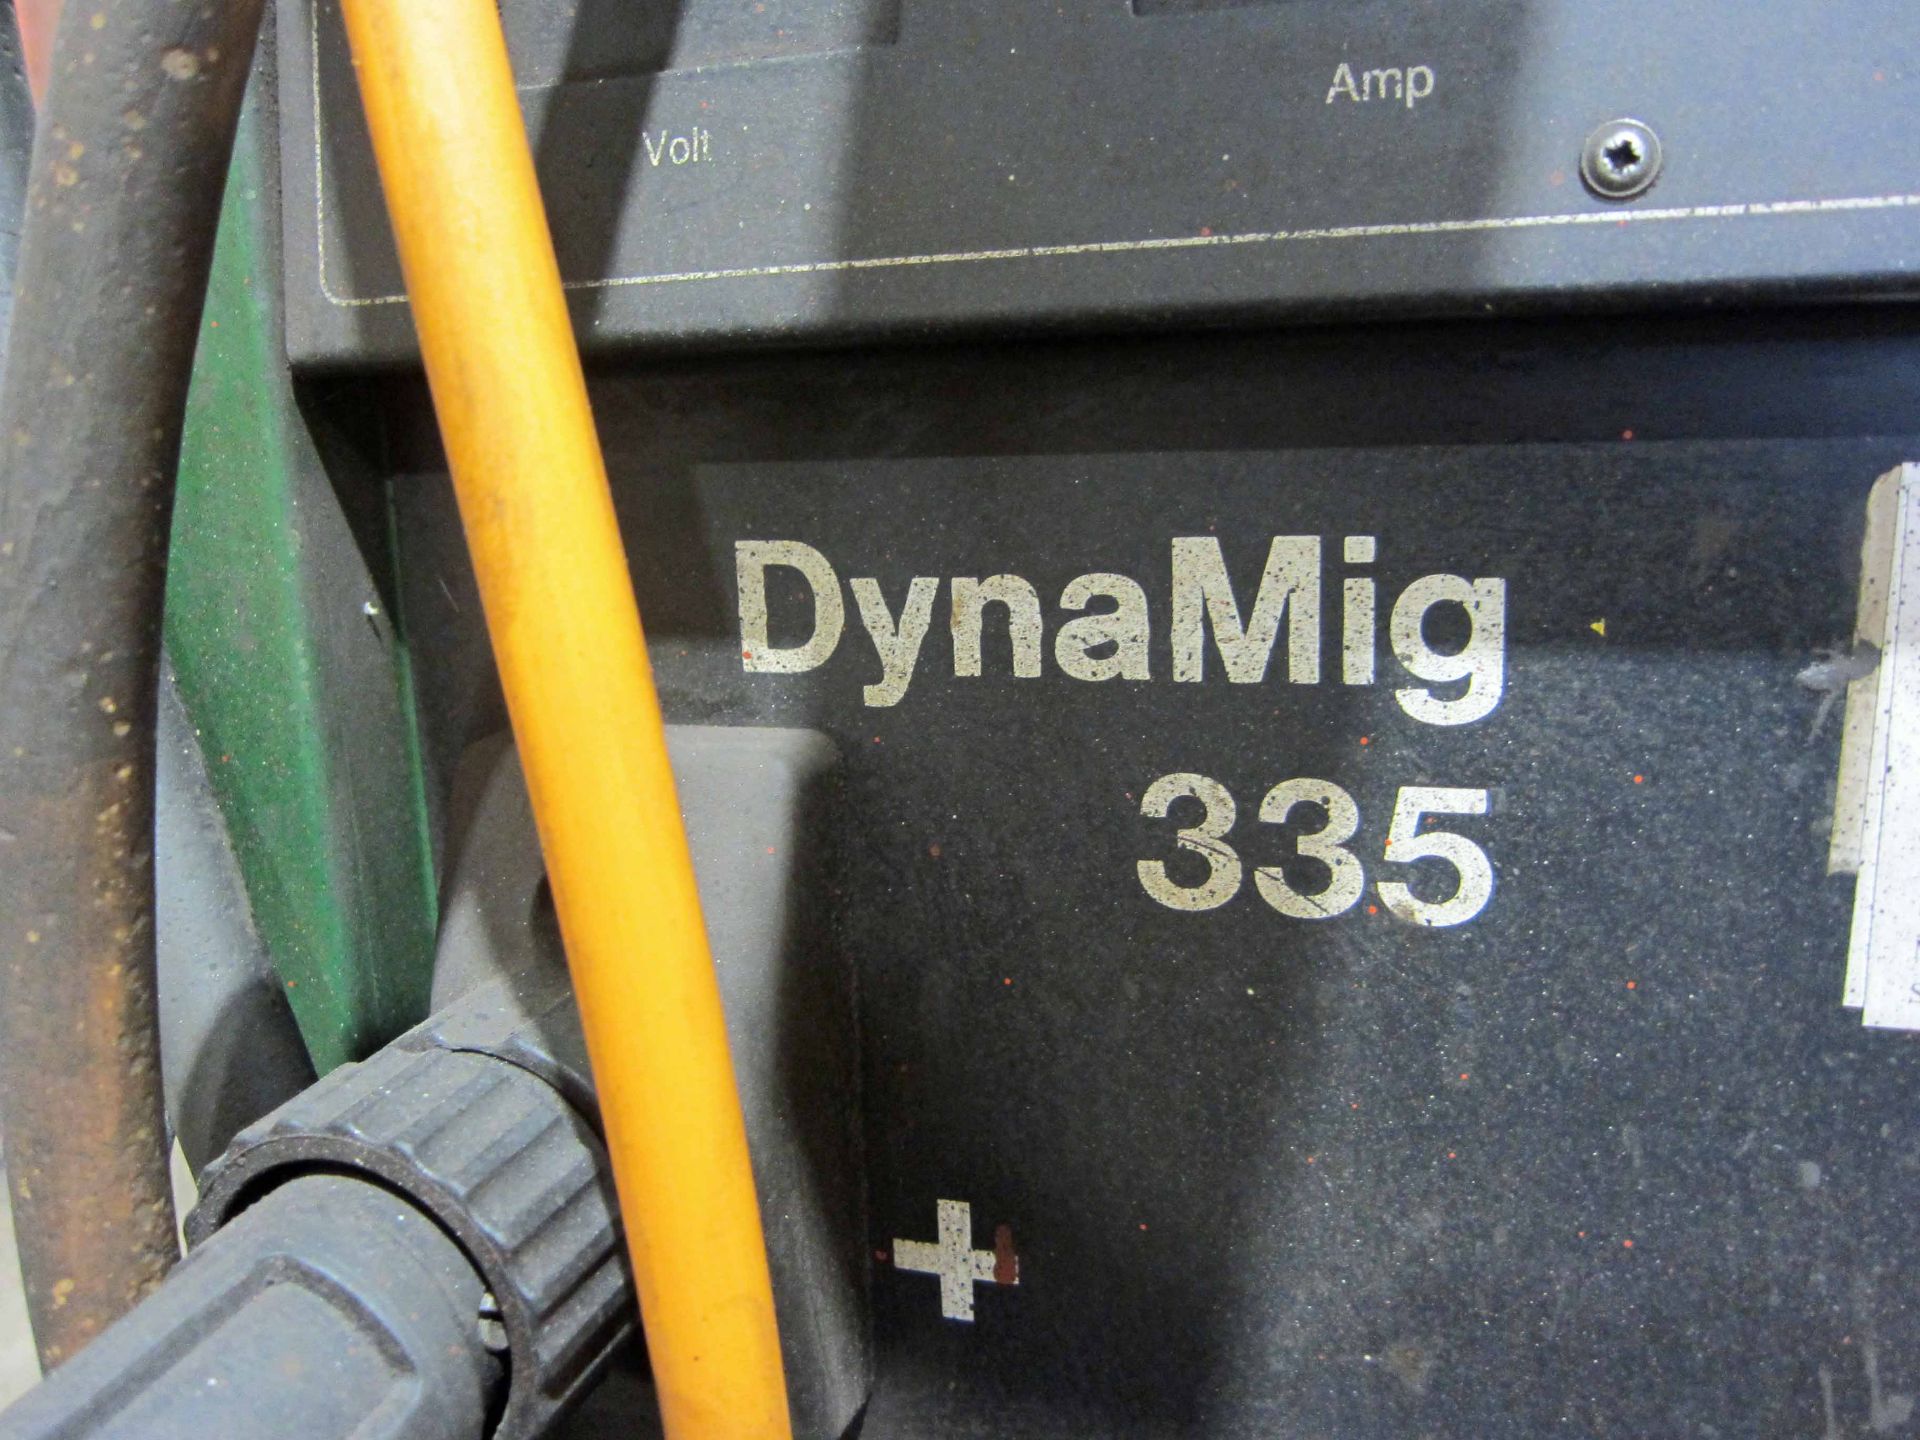 A MIGTRONIC Model Dyna Mig 335 Mig Welder (KDO335) complete with QUALITRONICS Voltage and Amp and - Image 5 of 7